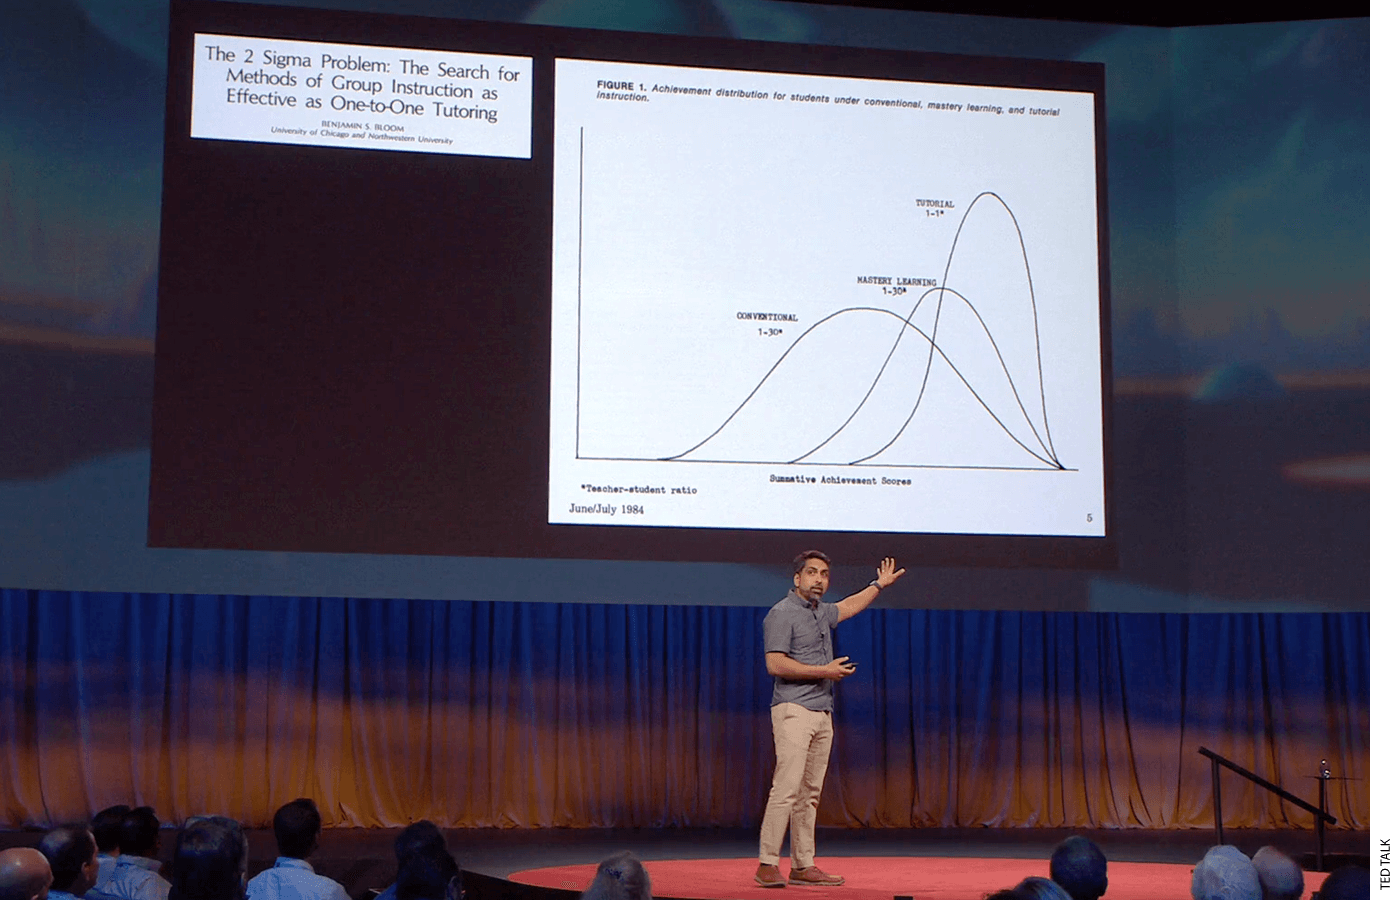 Benjamin Bloom’s essay “The 2 Sigma Problem,” featuring his famous hand-drawn Figure 1 showing the supposed immense benefit from one-to-one tutoring, has created believers and skeptics for 40 years. Now with the emergence of generative artificial intelligence, education innovators like Sal Khan of Khan Academy see the potential for AI tutors to fulfill the promise of Bloom’s claim.